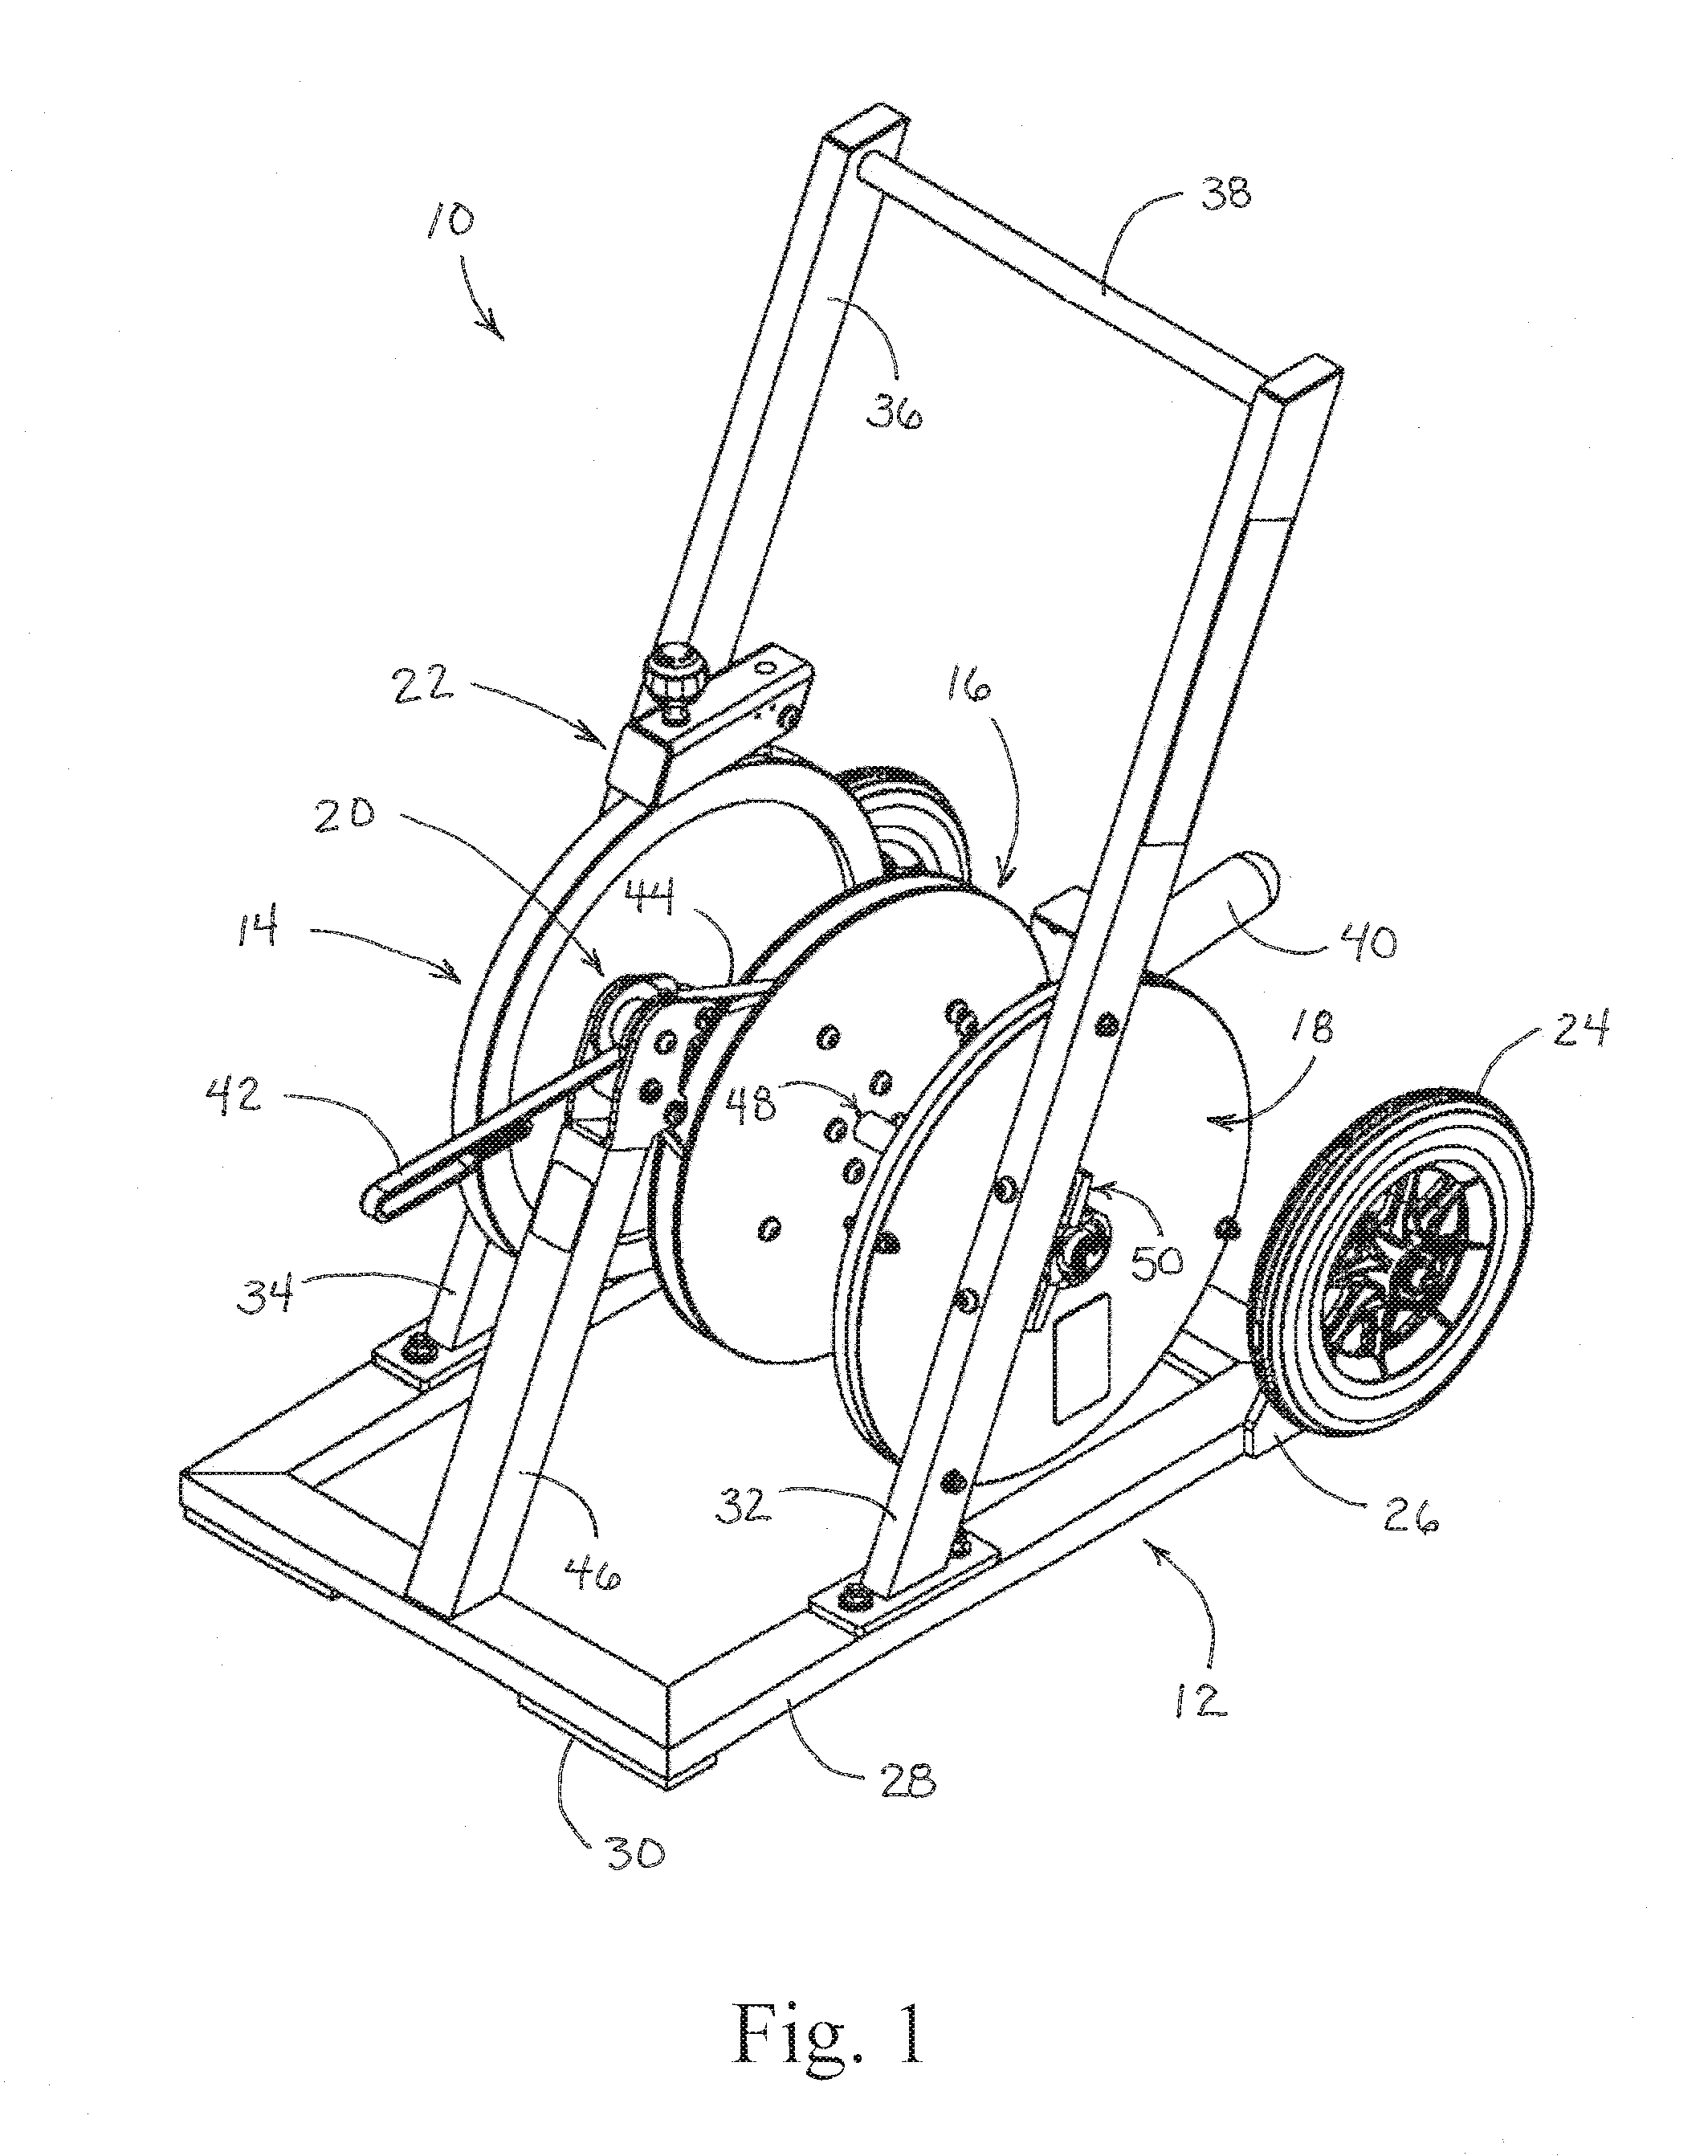 Exercise Machine for Providing Resistance to Ambulatory Motion of the User